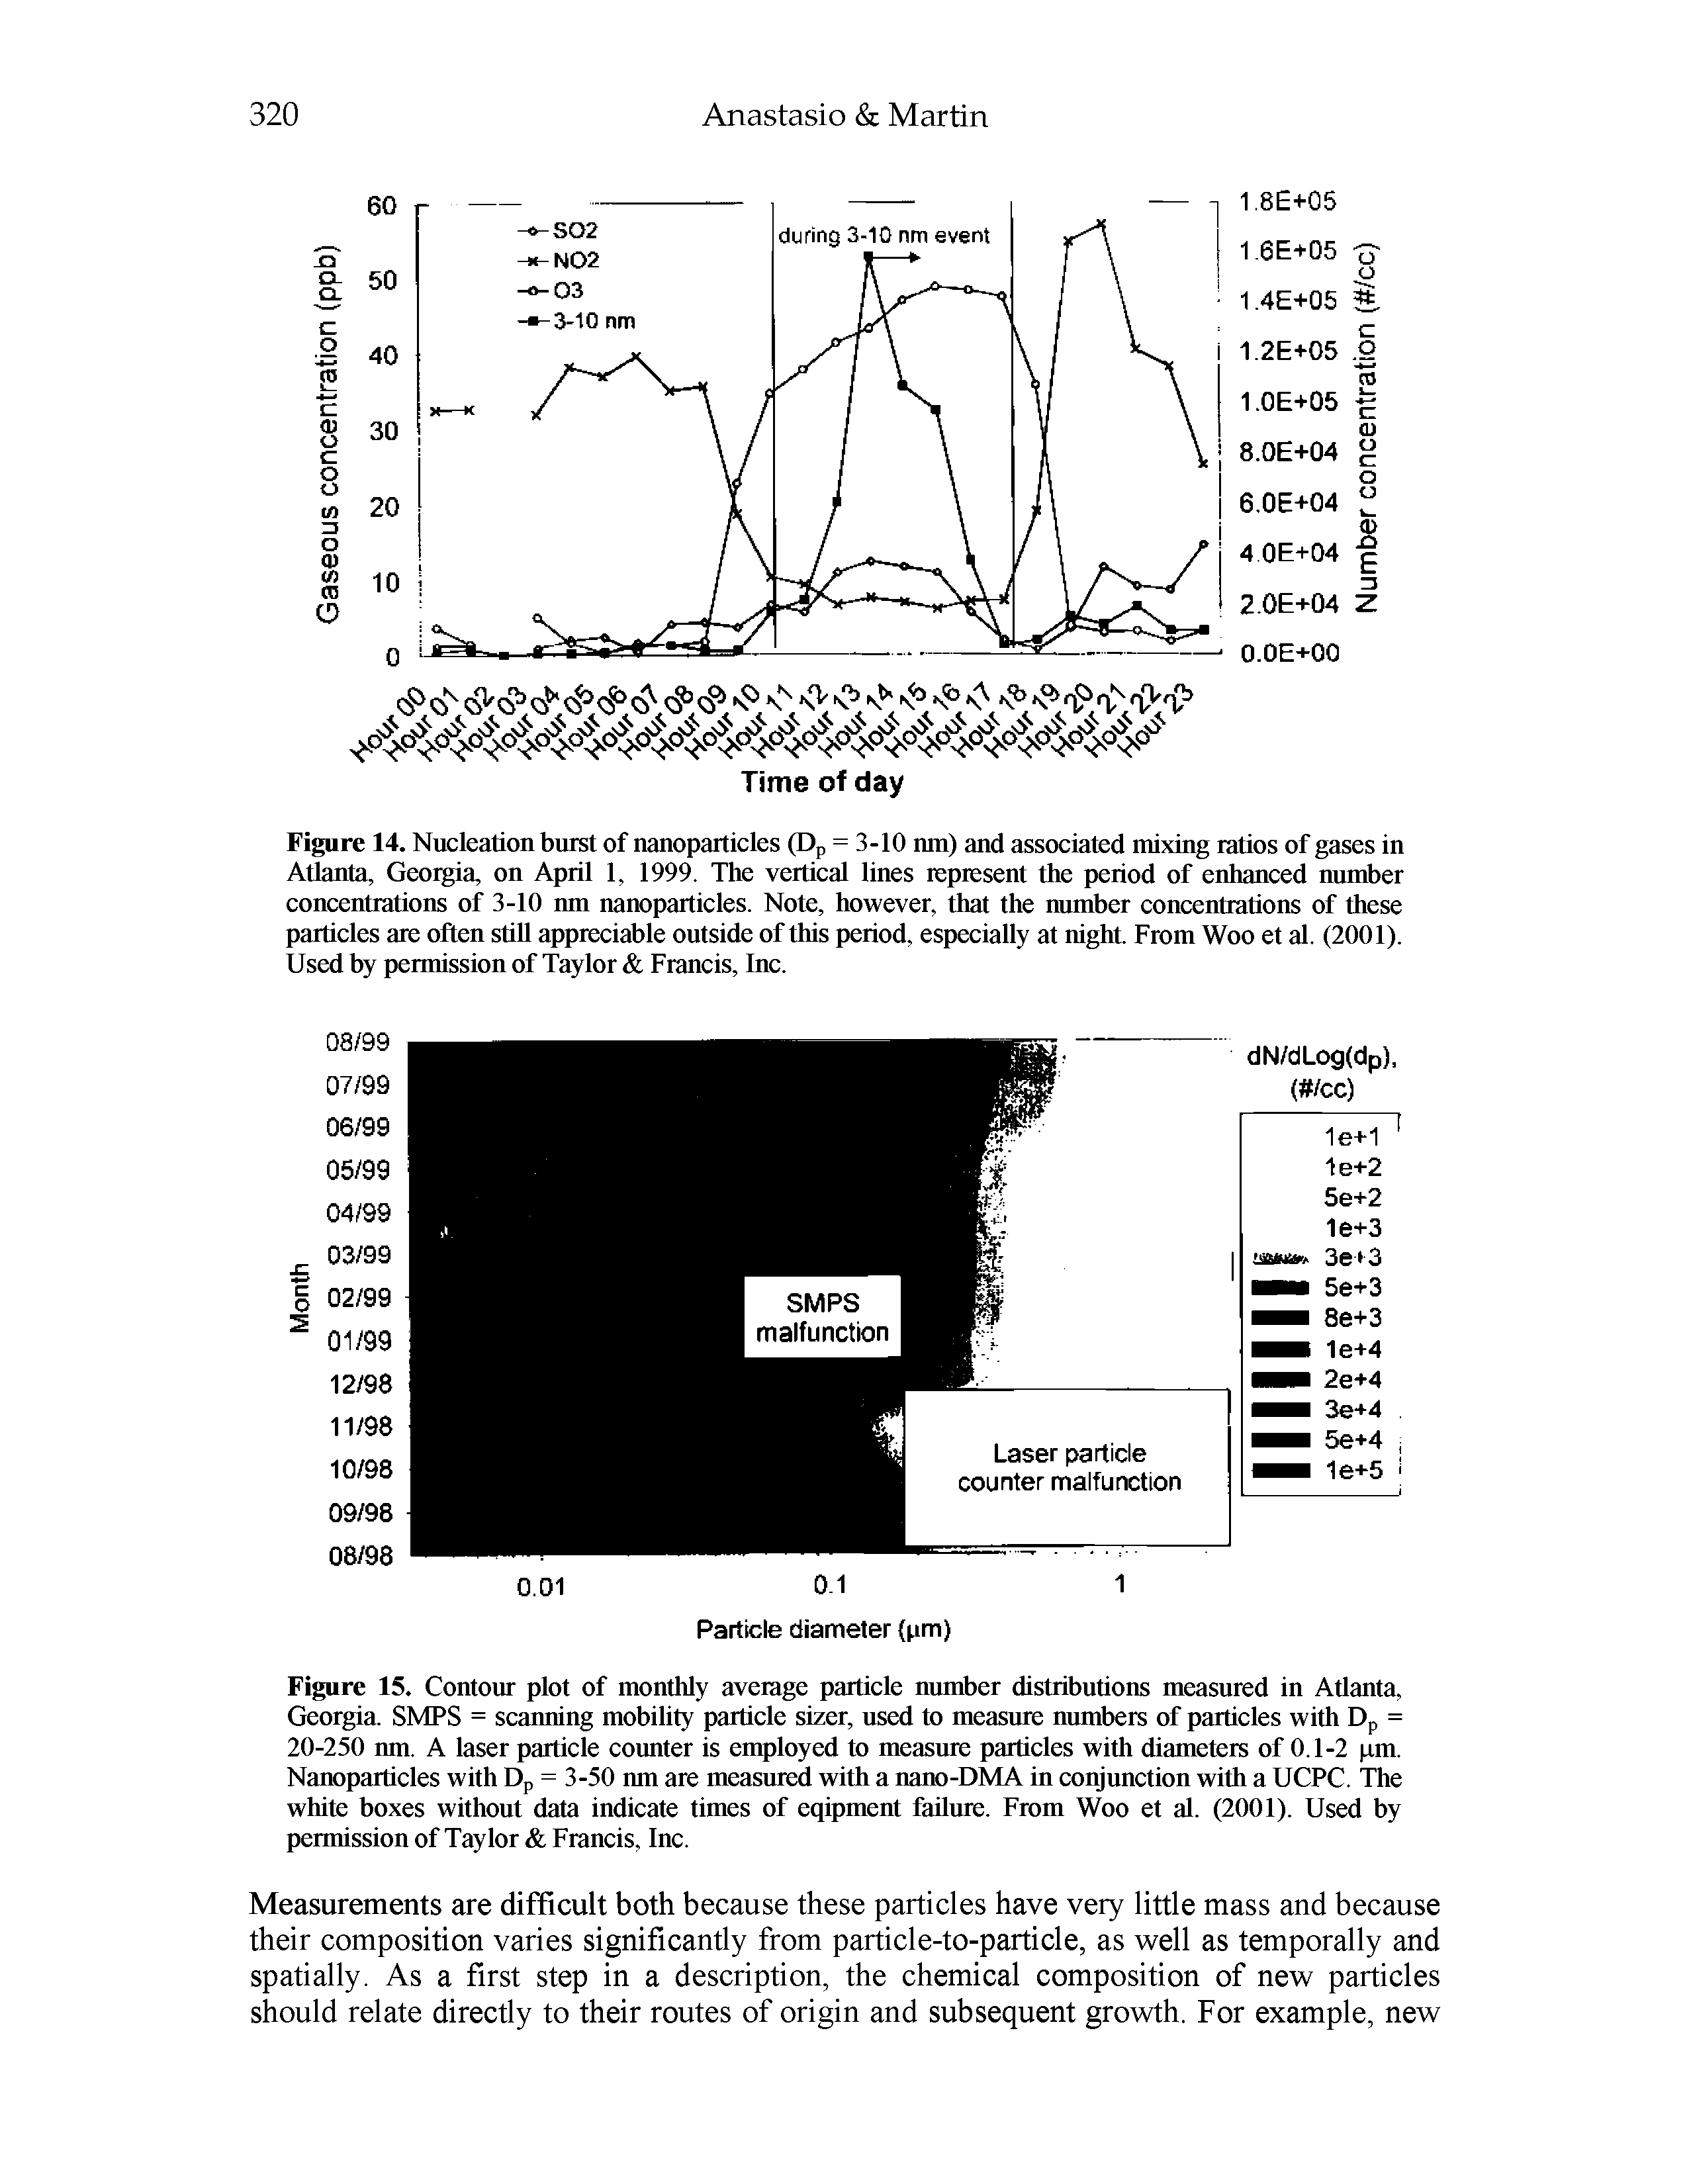 Figure 14. Nucleation burst of nanoparticles (Dp = 3-10 mn) and associated mixing ratios of gases in Atlanta, Georgia, on April 1, 1999. The vertical lines represent the period of enhanced number concentrations of 3-10 mn nanoparticles. Note, however, that the number concentrations of these particles are often still appreciable outside of this period, especially at night. From Woo et al. (2001). Used by permission of Taylor Francis, Inc.